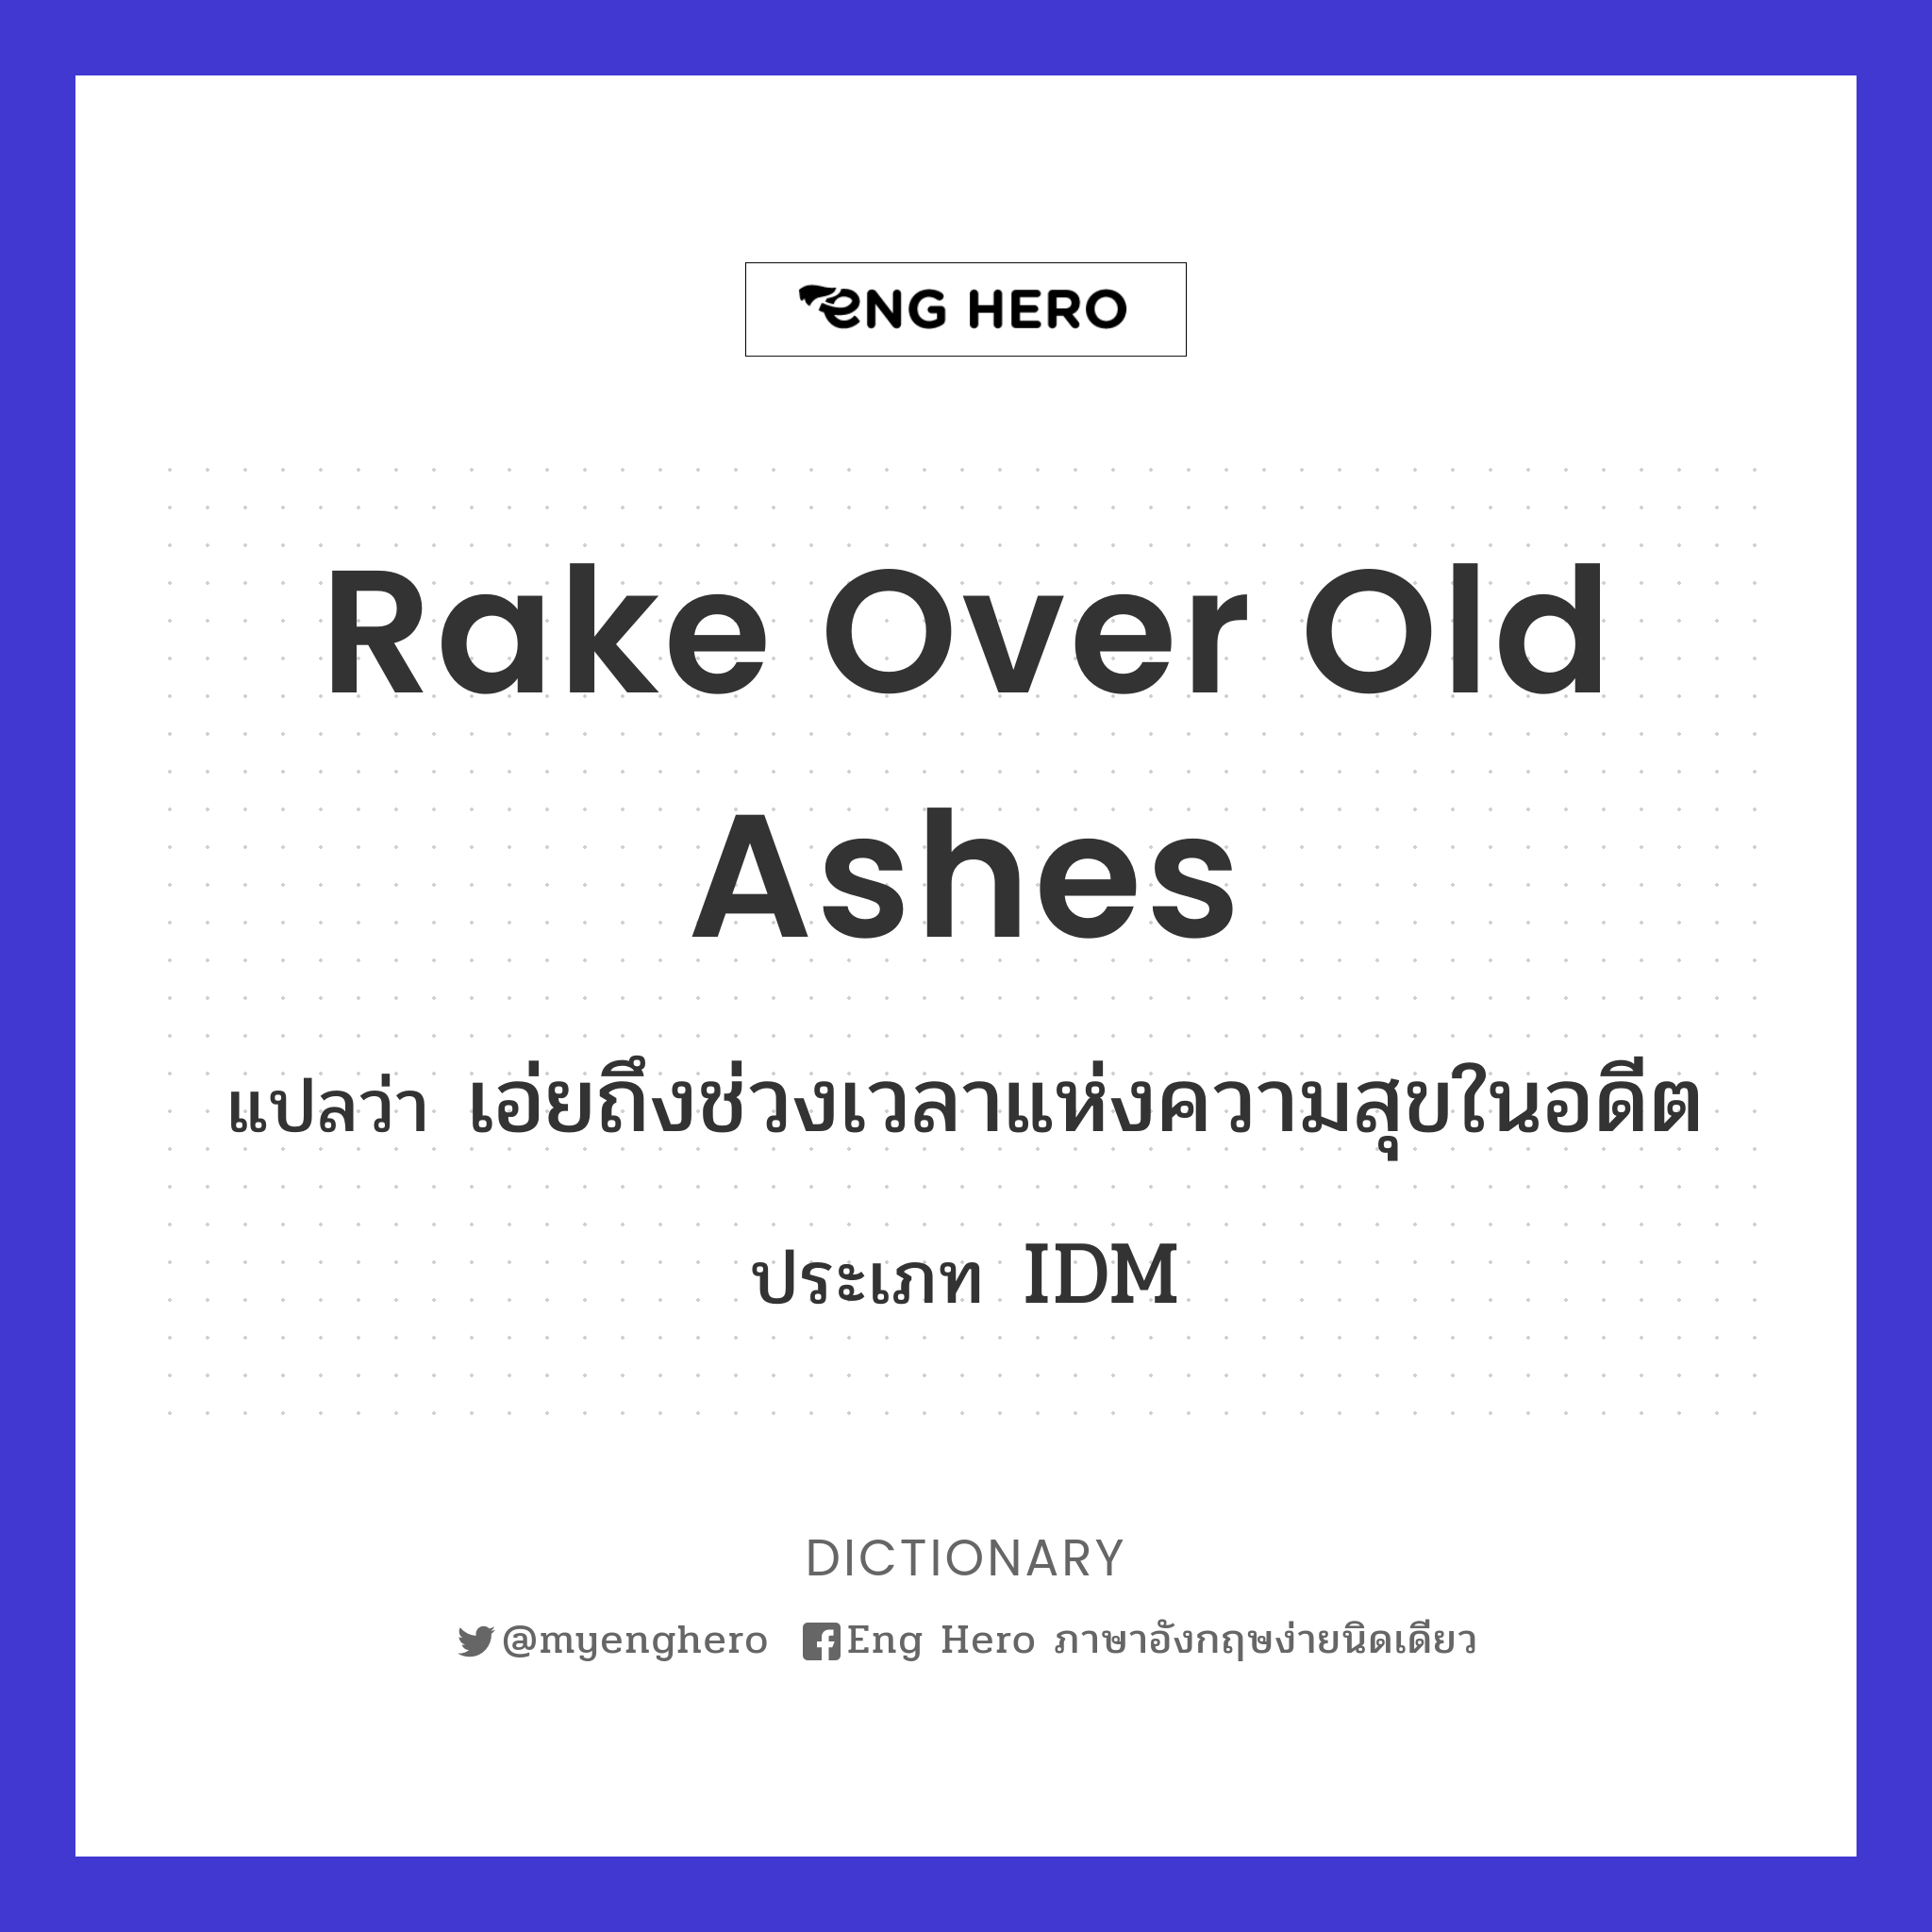 rake over old ashes